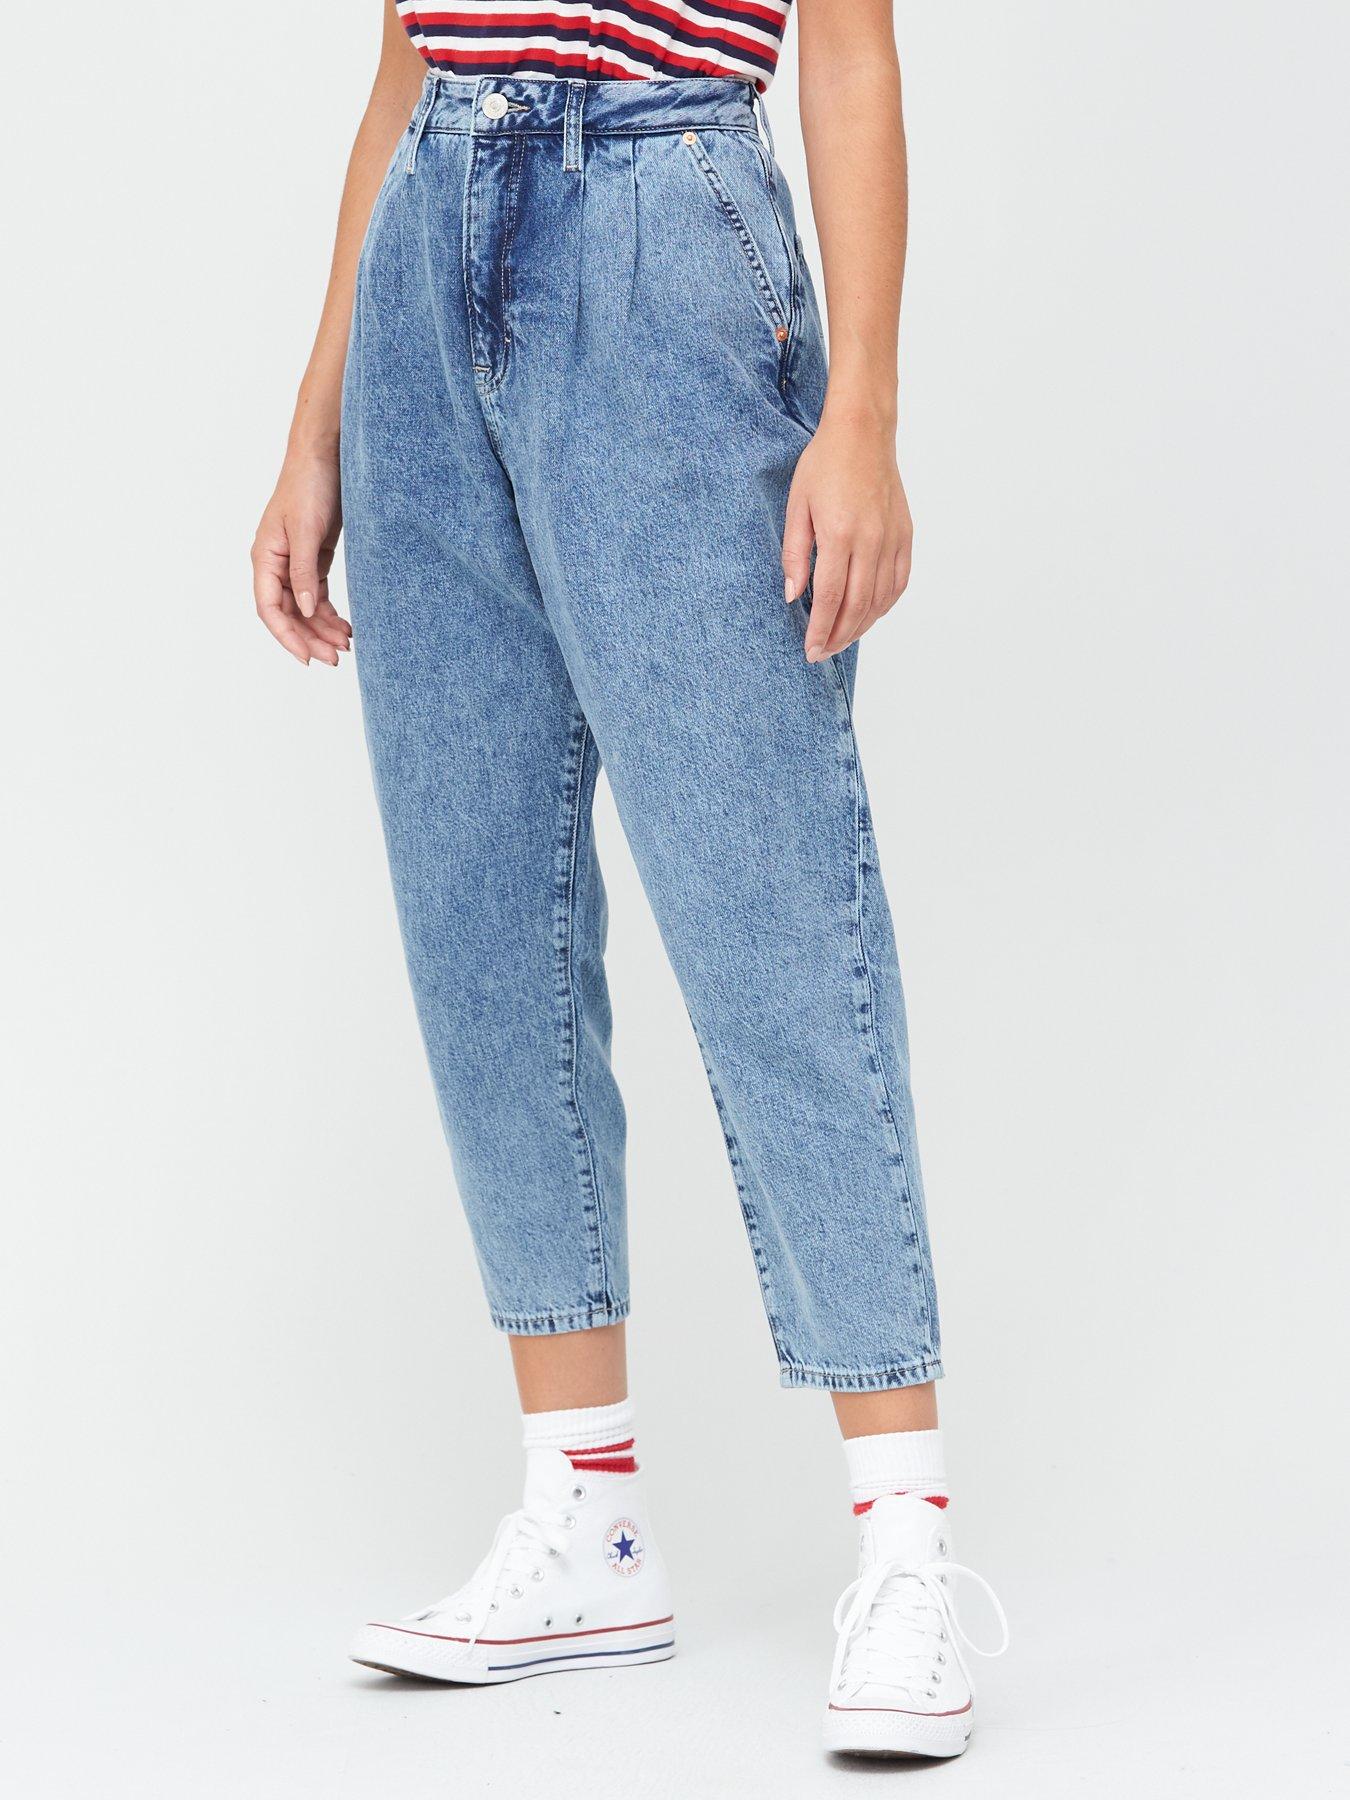 lee jeans more like this